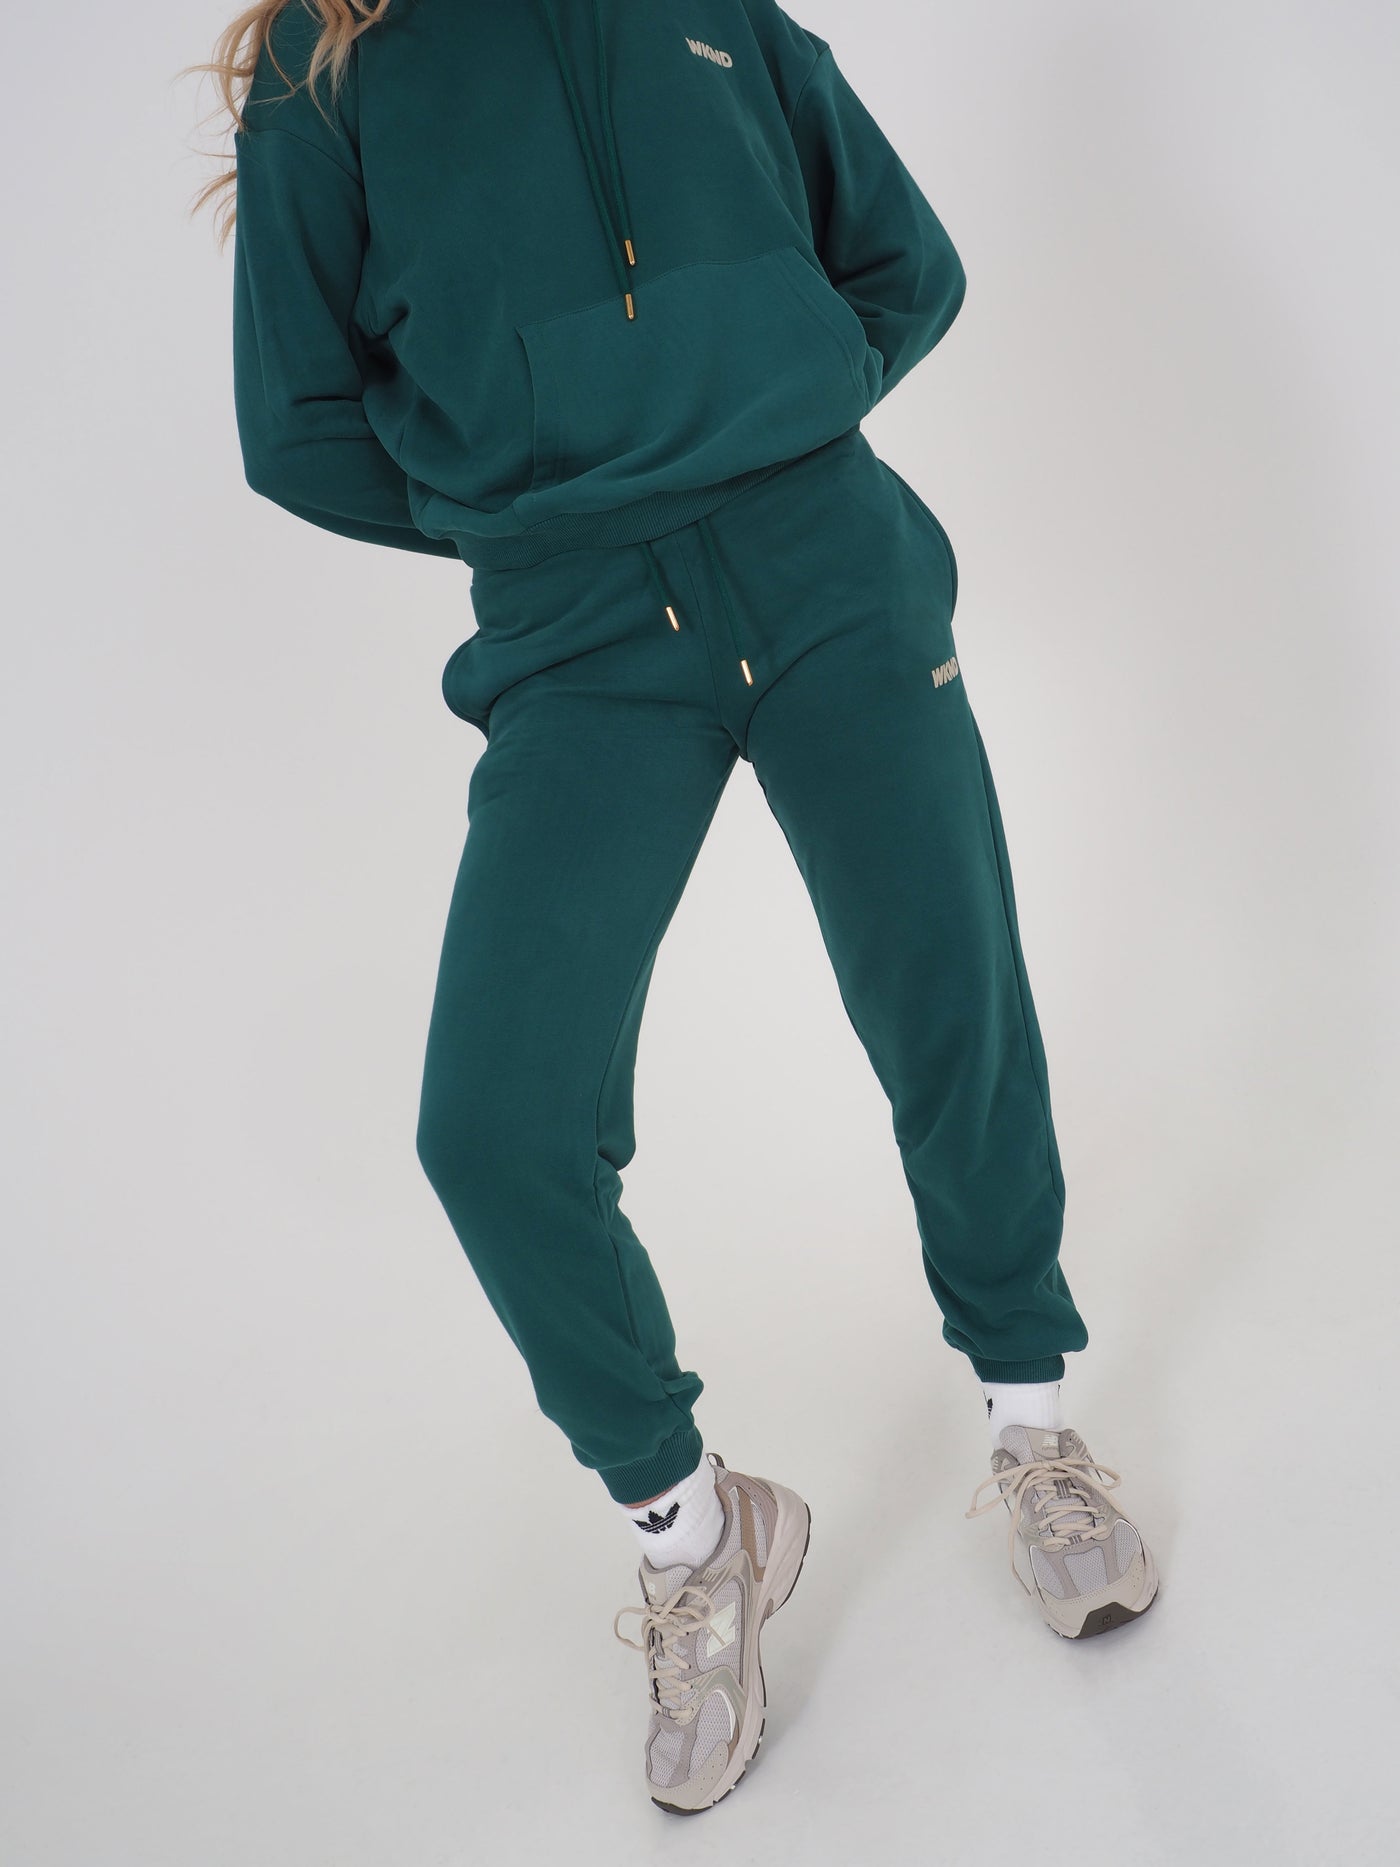 Model is wearing green joggers and matching hoodie.